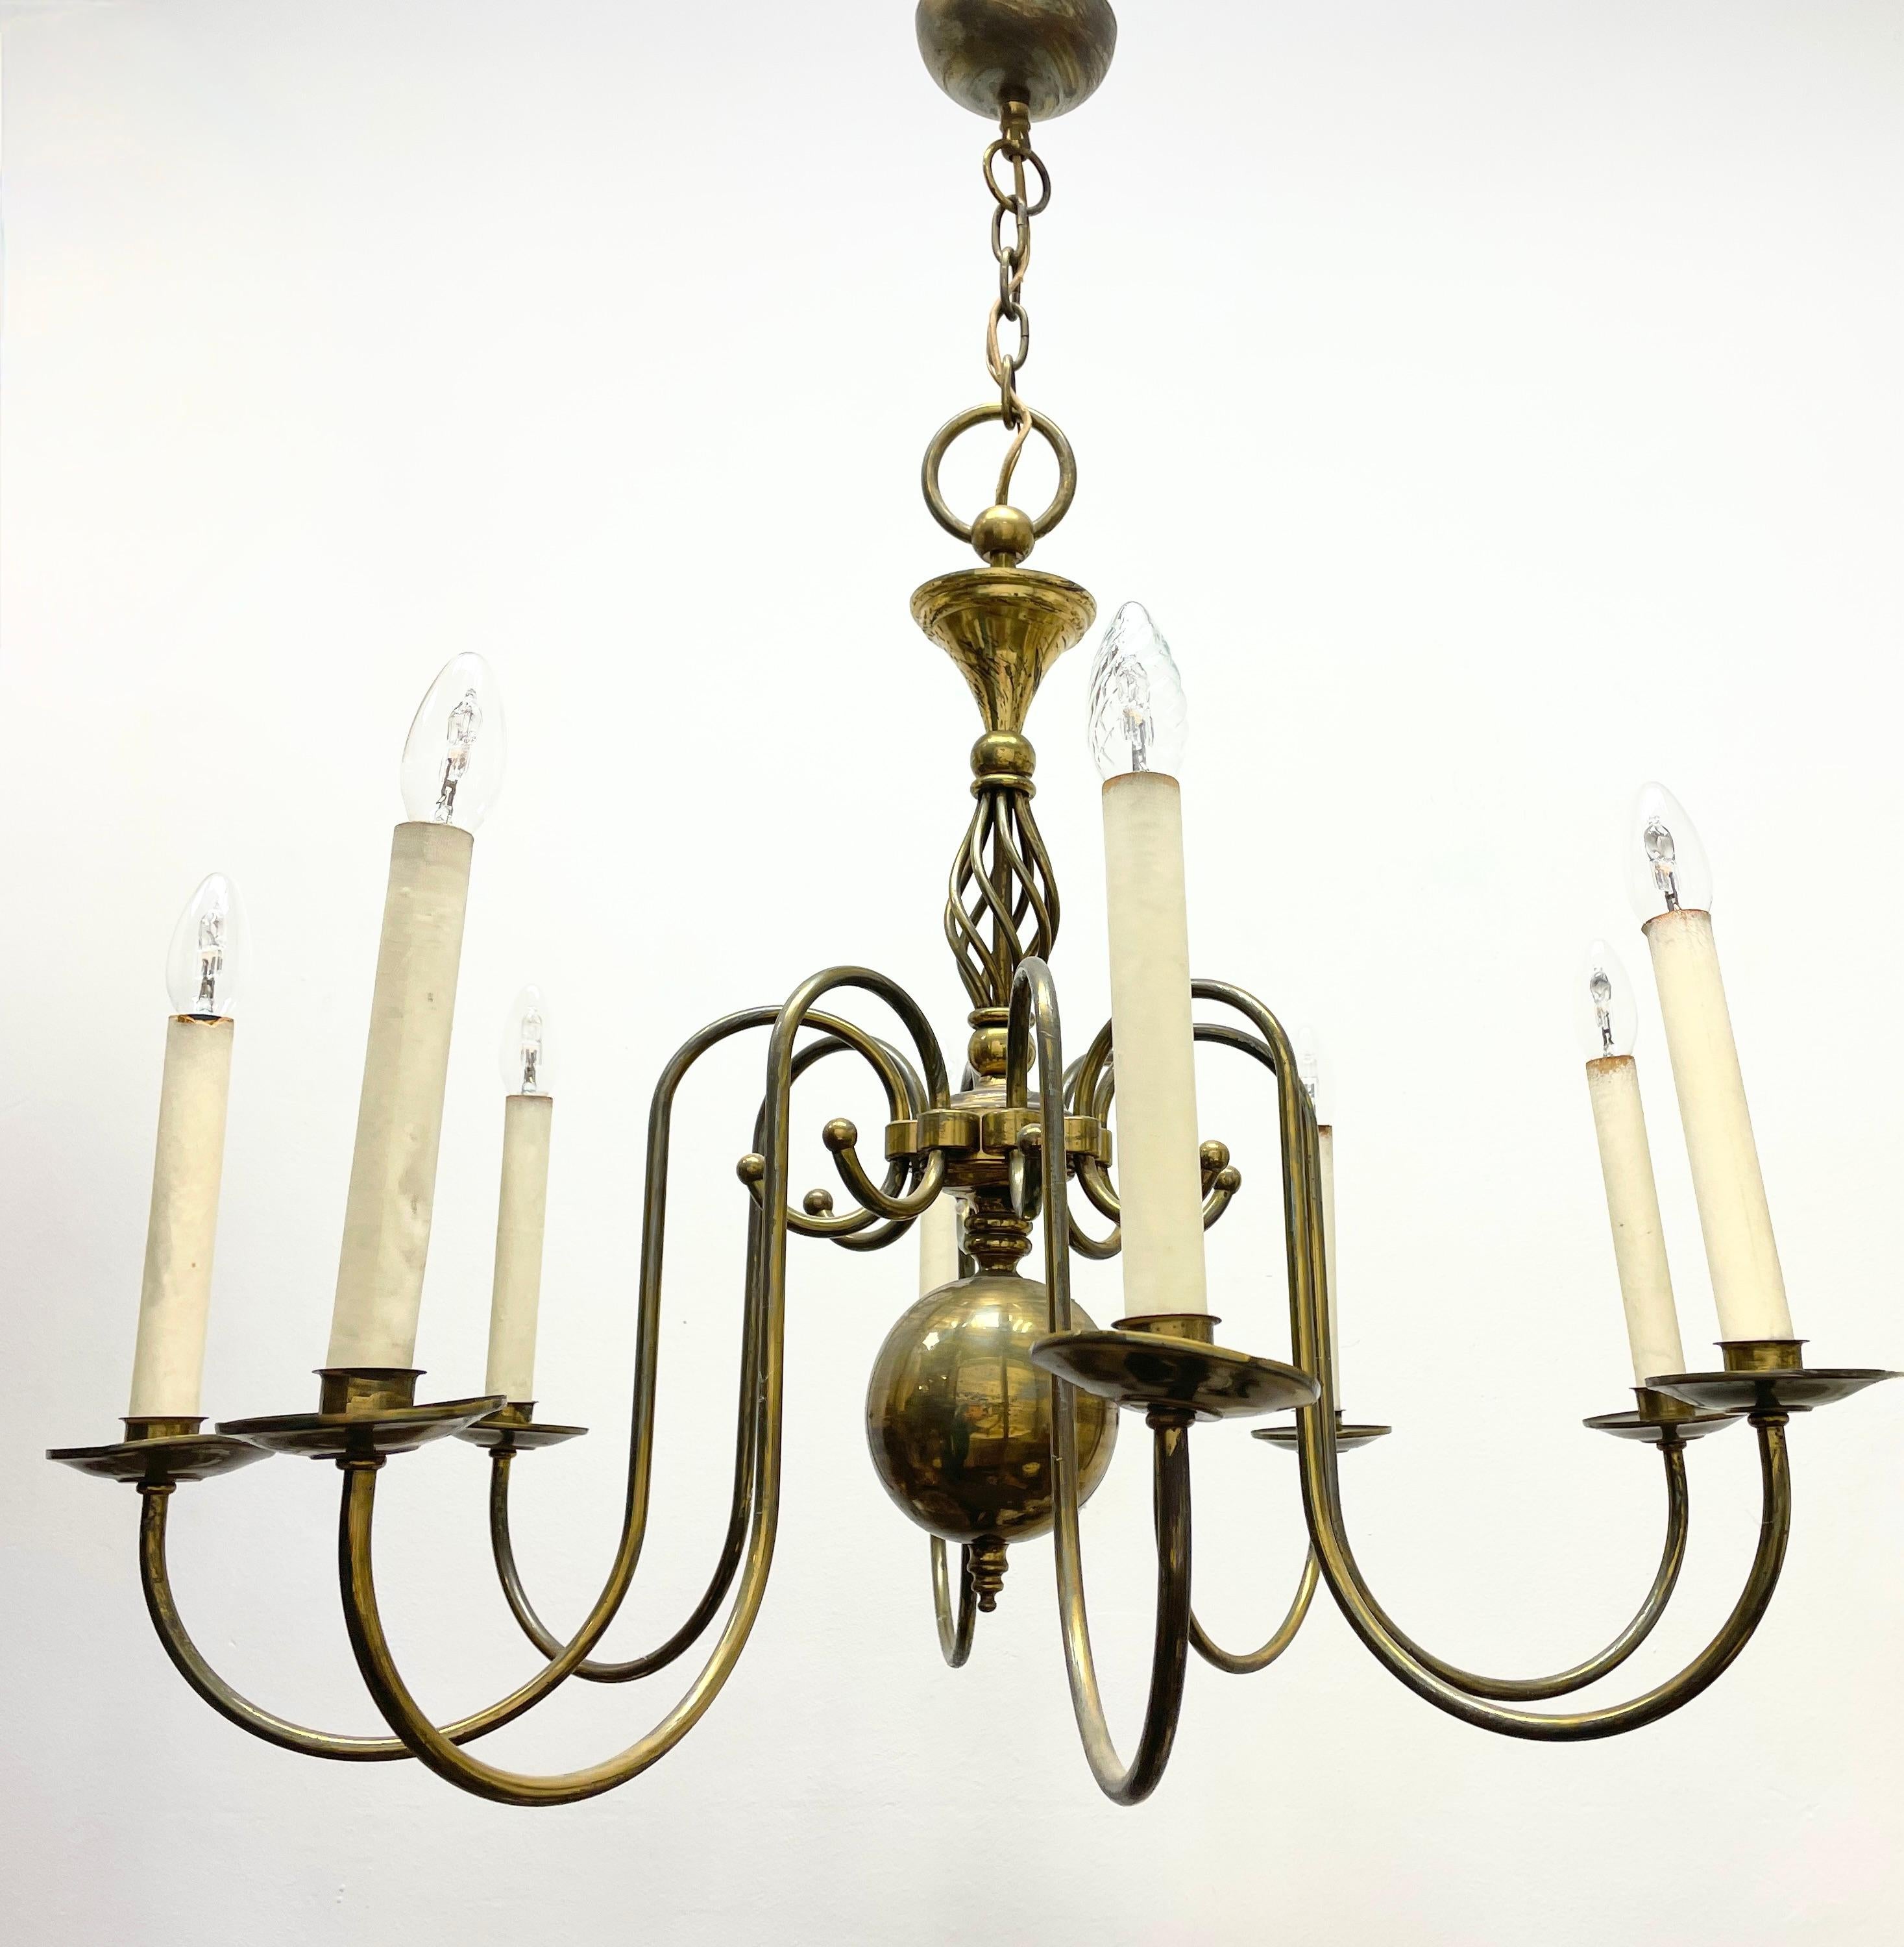 Add a touch of opulence to your home with this charming chandelier! Perfect patina to the Metal to enhance any chic or eclectic home. We'd love to see it hanging in an entry hall or in a Living / Dinning room area. Built in the 1930s, made by a